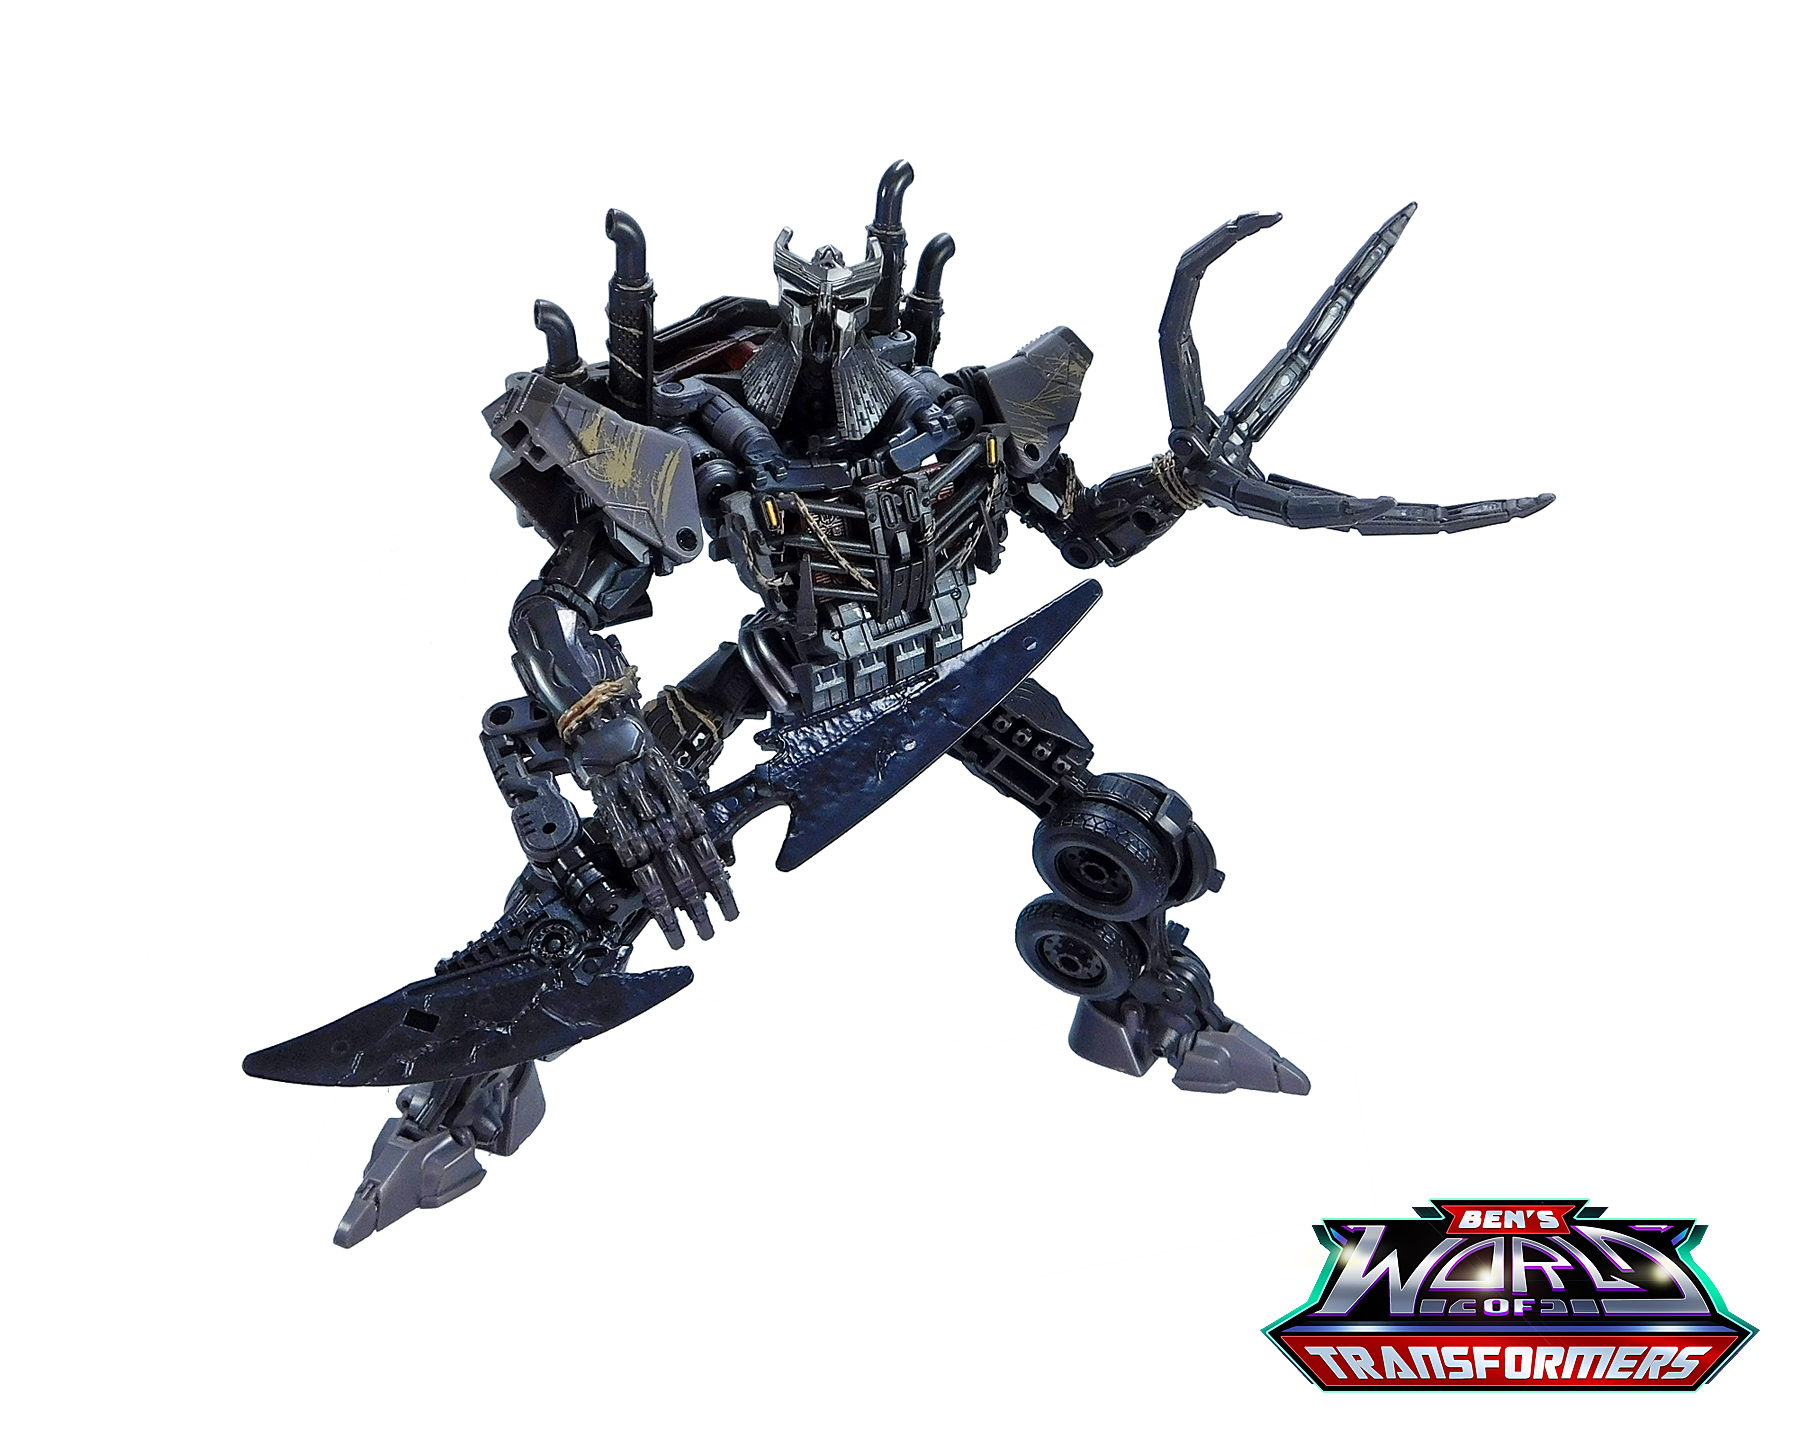  Transformers Toys Studio Series Leader Class 101 Scourge Toy,  8.5-inch, Action Figure for Boys and Girls Ages 8 and Up : Toys & Games